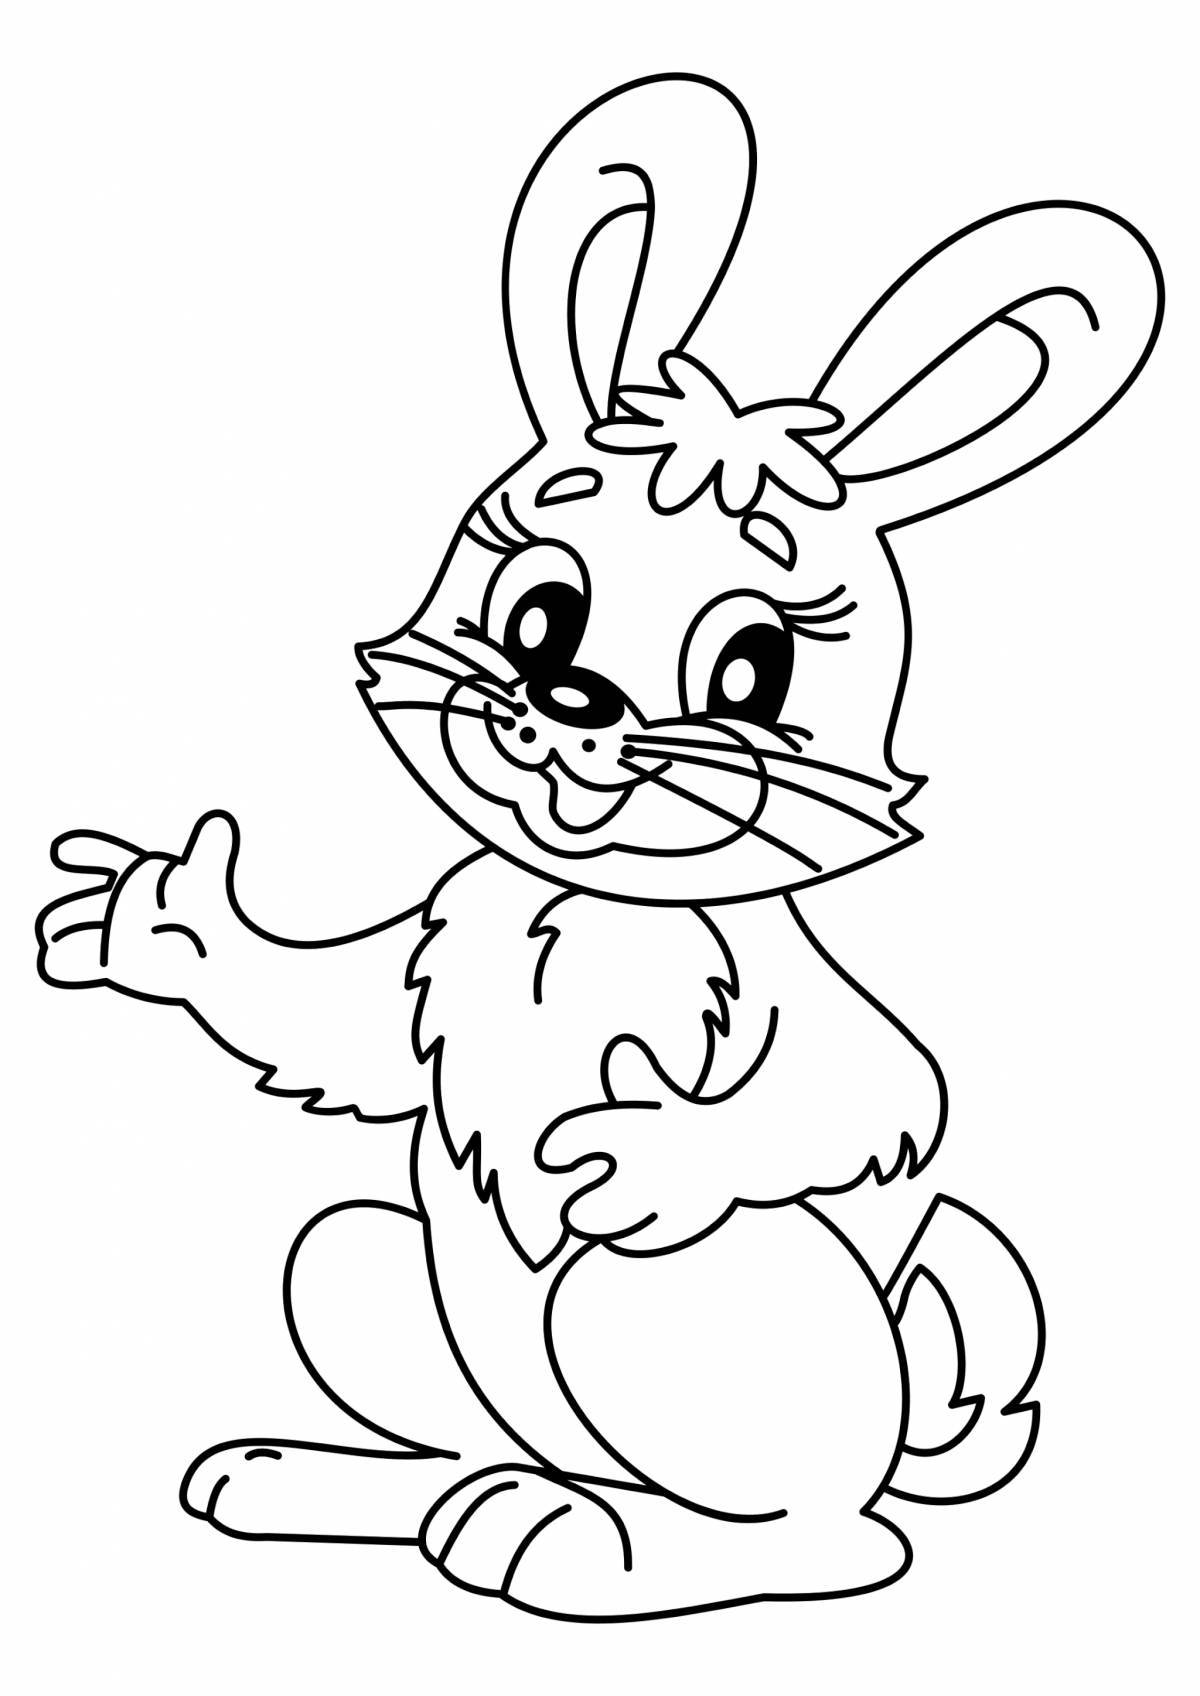 Playful coloring hare picture